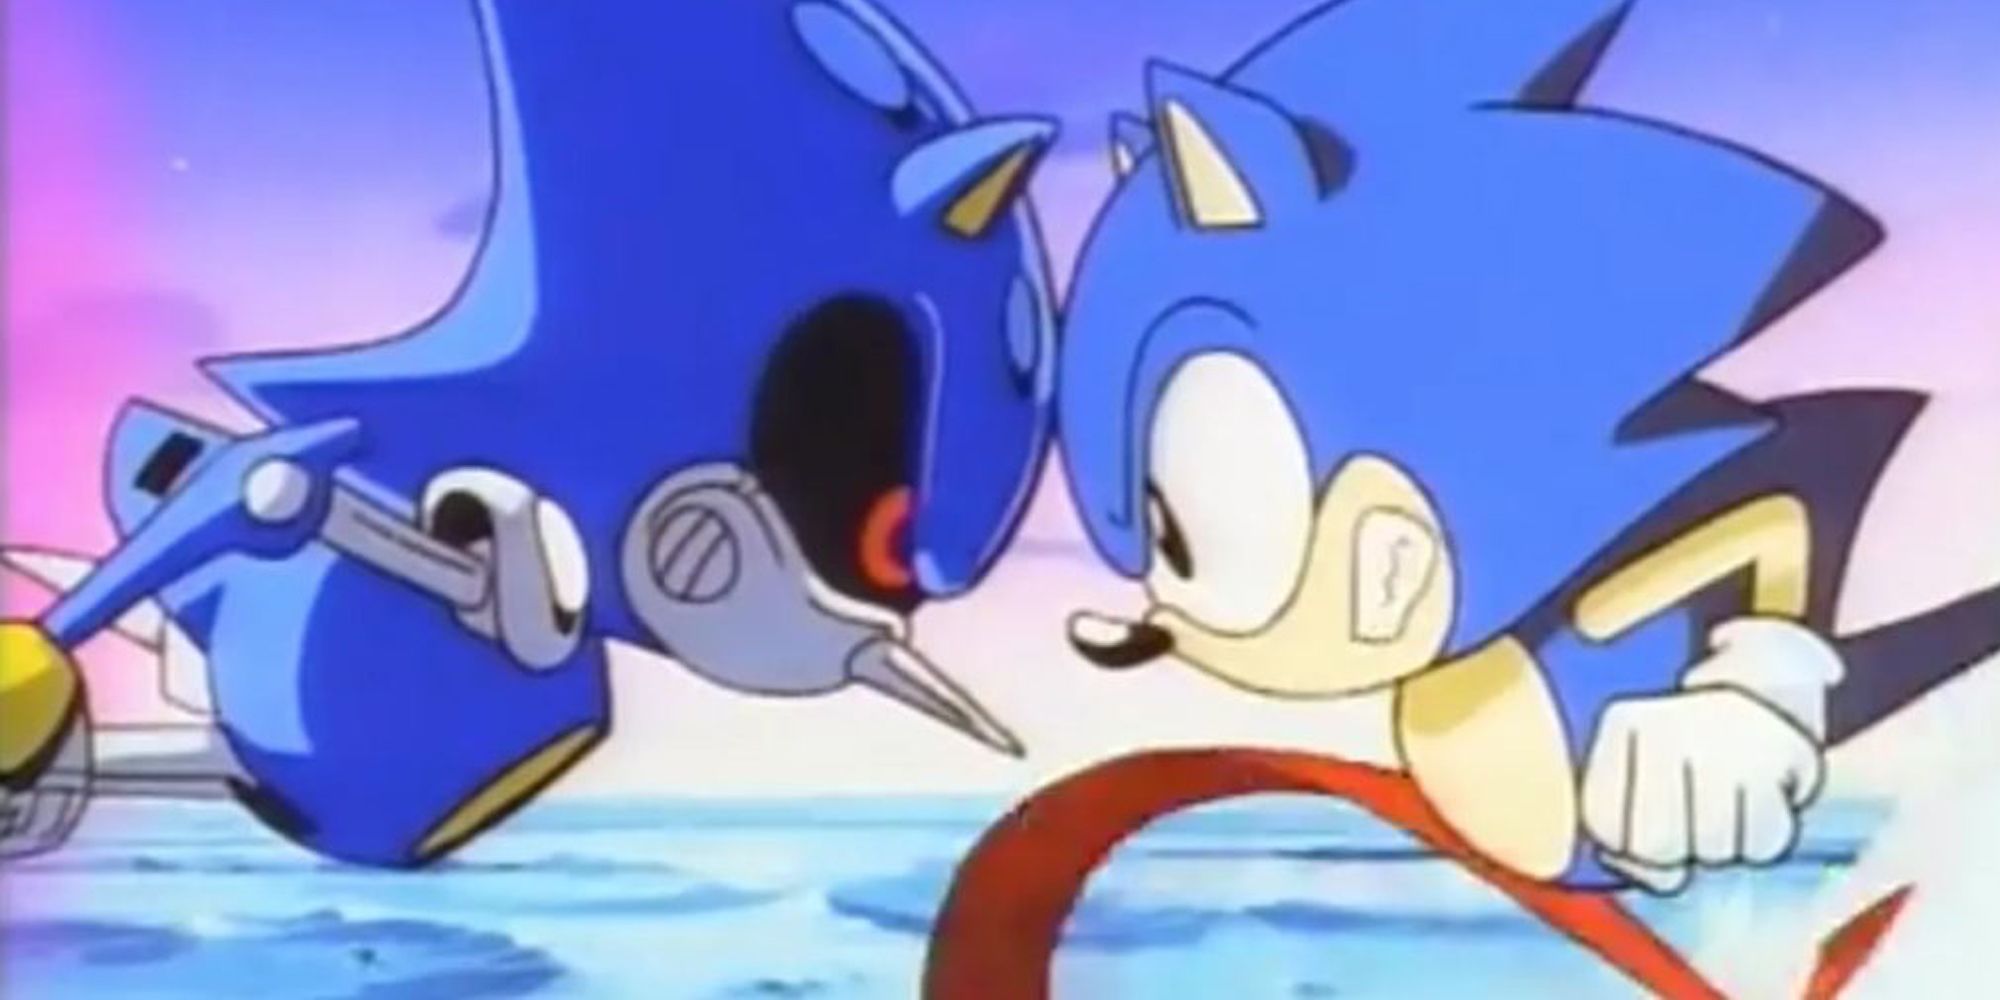 Sonic and Metal Sonic in Sonic OVA butting their foreheads together.